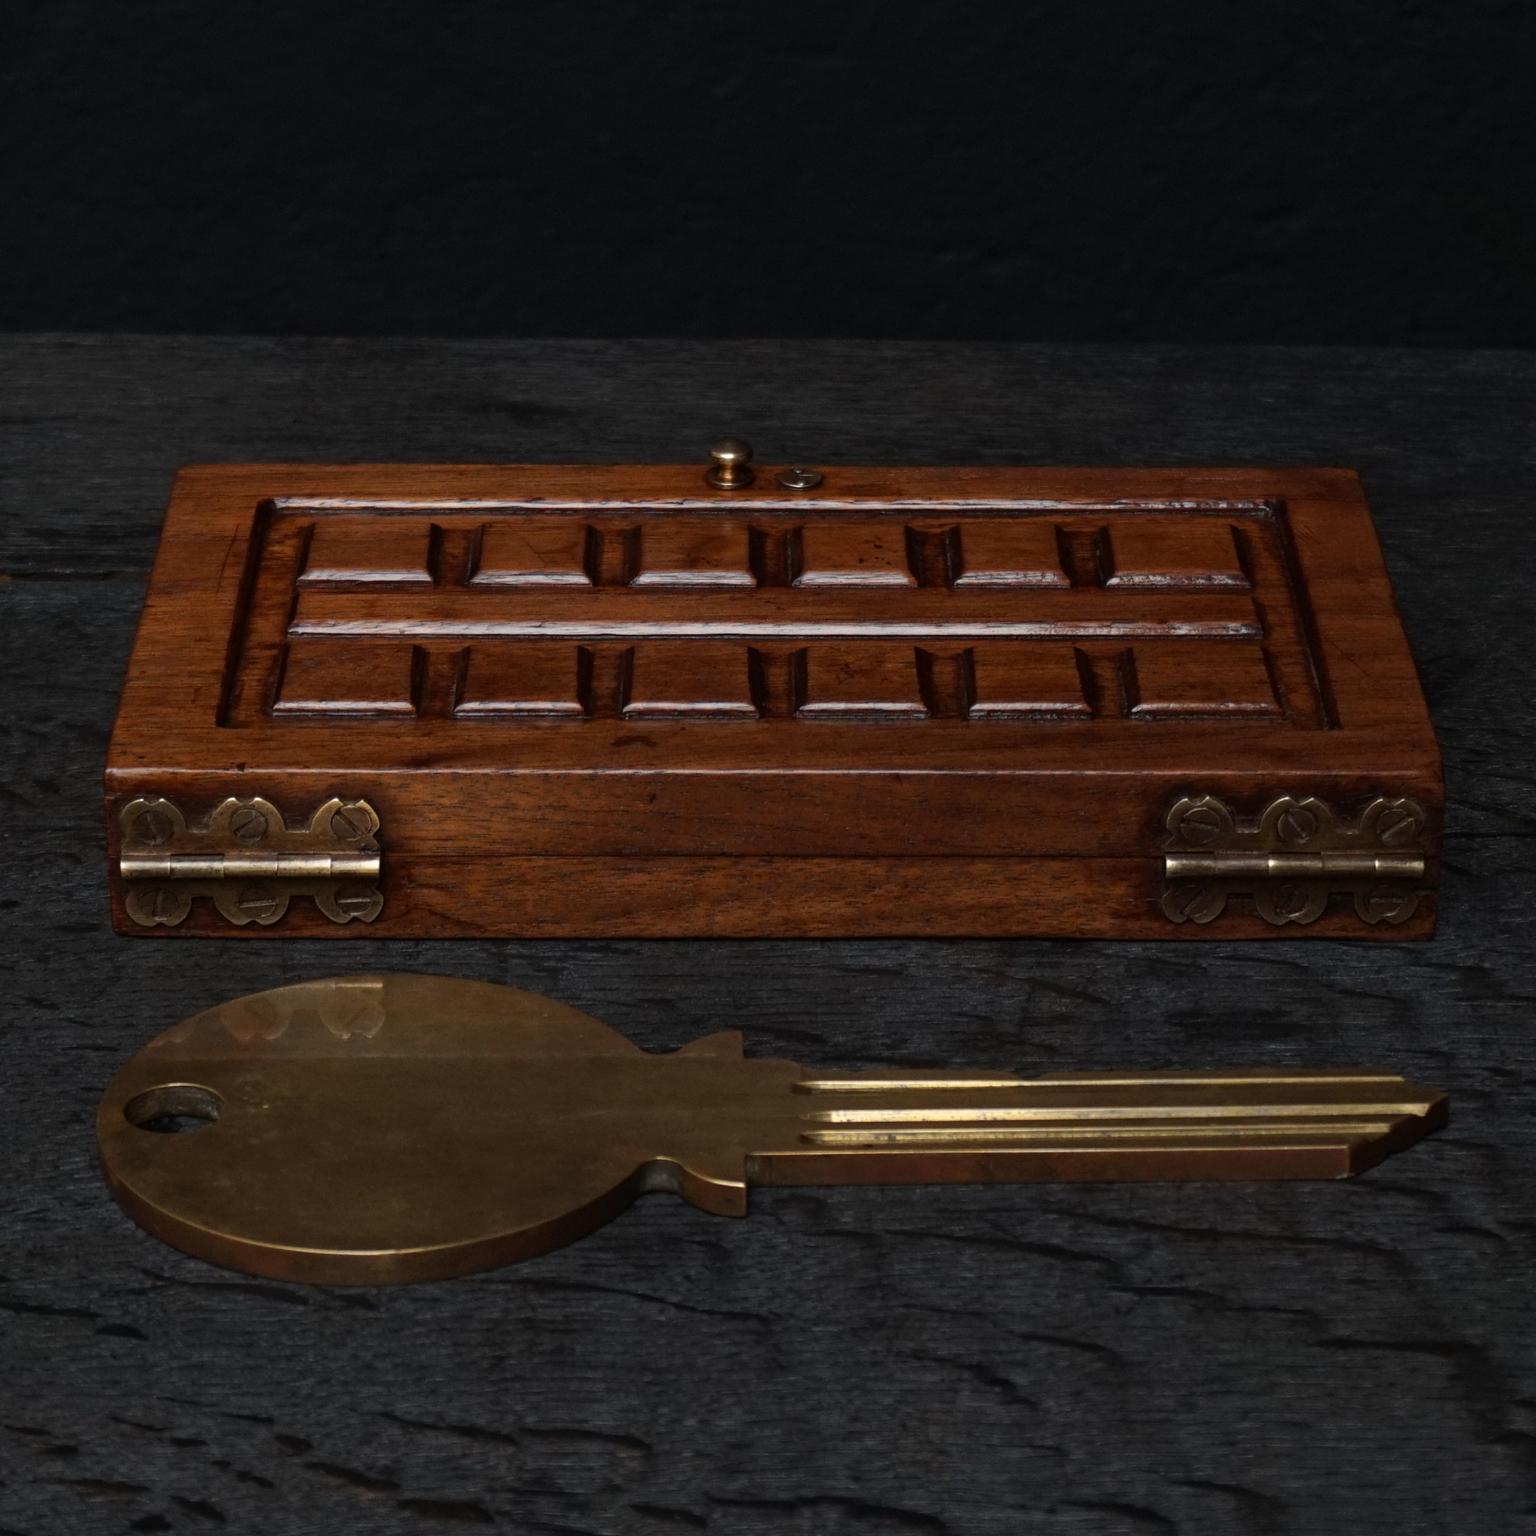 Nutwood Midcentury Large Brass Key in Walnut Wood Flat Box Shaped as a Door For Sale